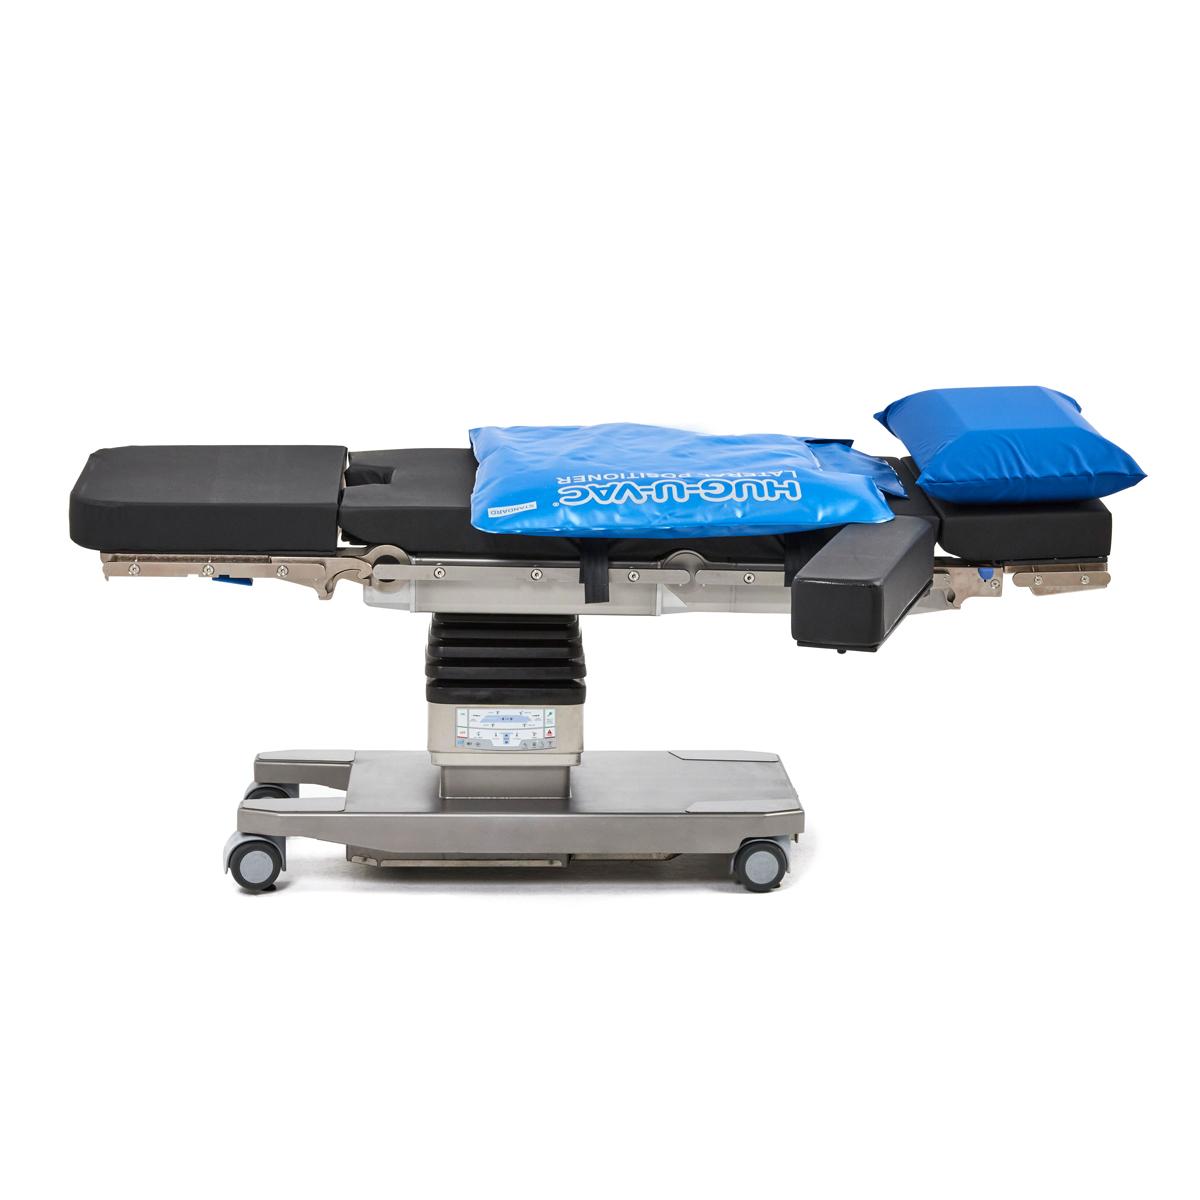 Hillrom surgical table equipped with Lateral Hug-U-Vac accessories.